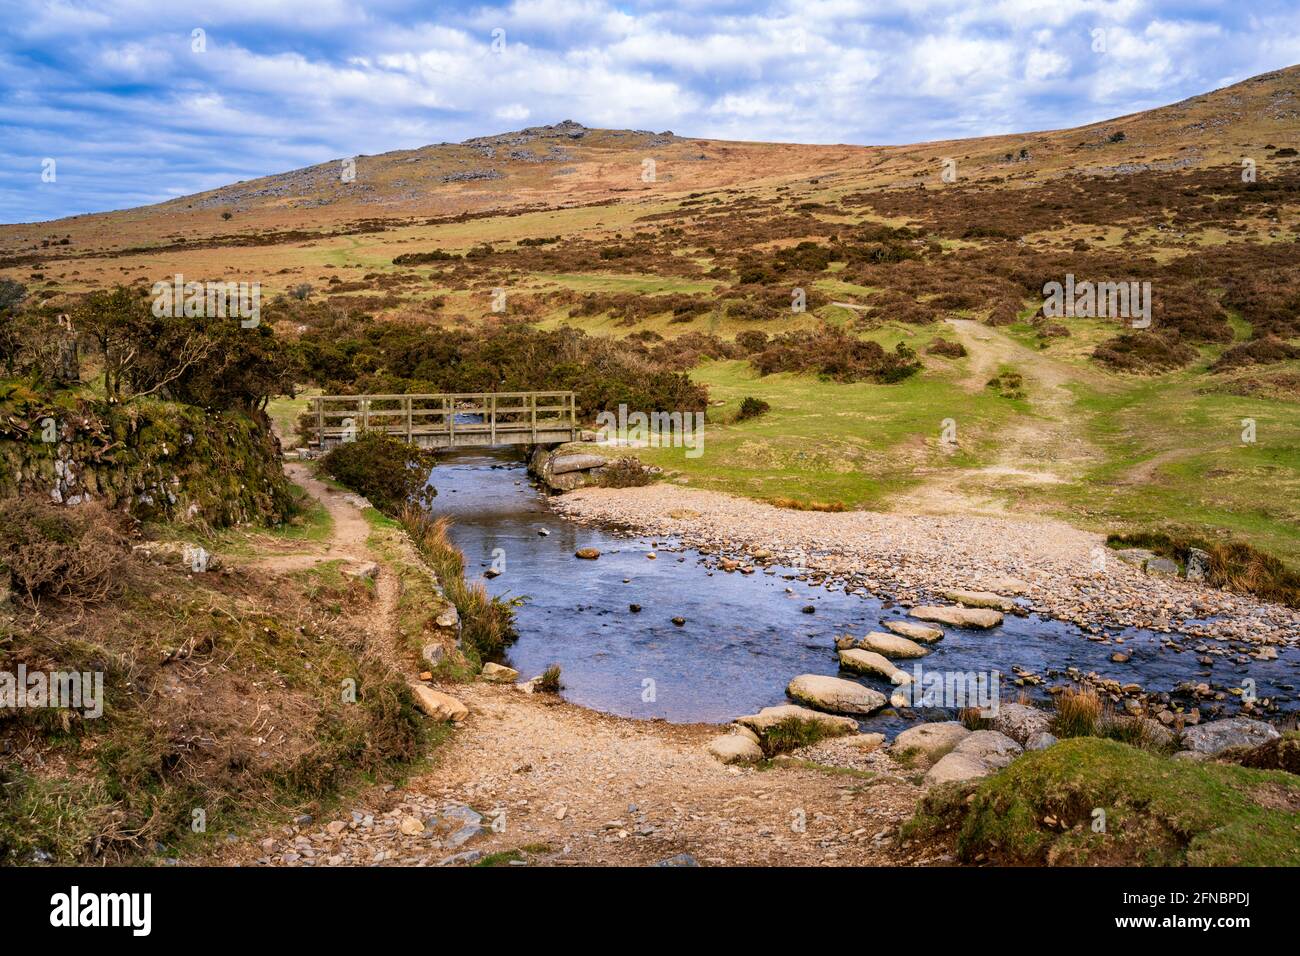 Choice of bridge or stepping stones to cross the River Lyd at High Down, near Lydford, Dartmoor National Park, Devon, England, UK Stock Photo